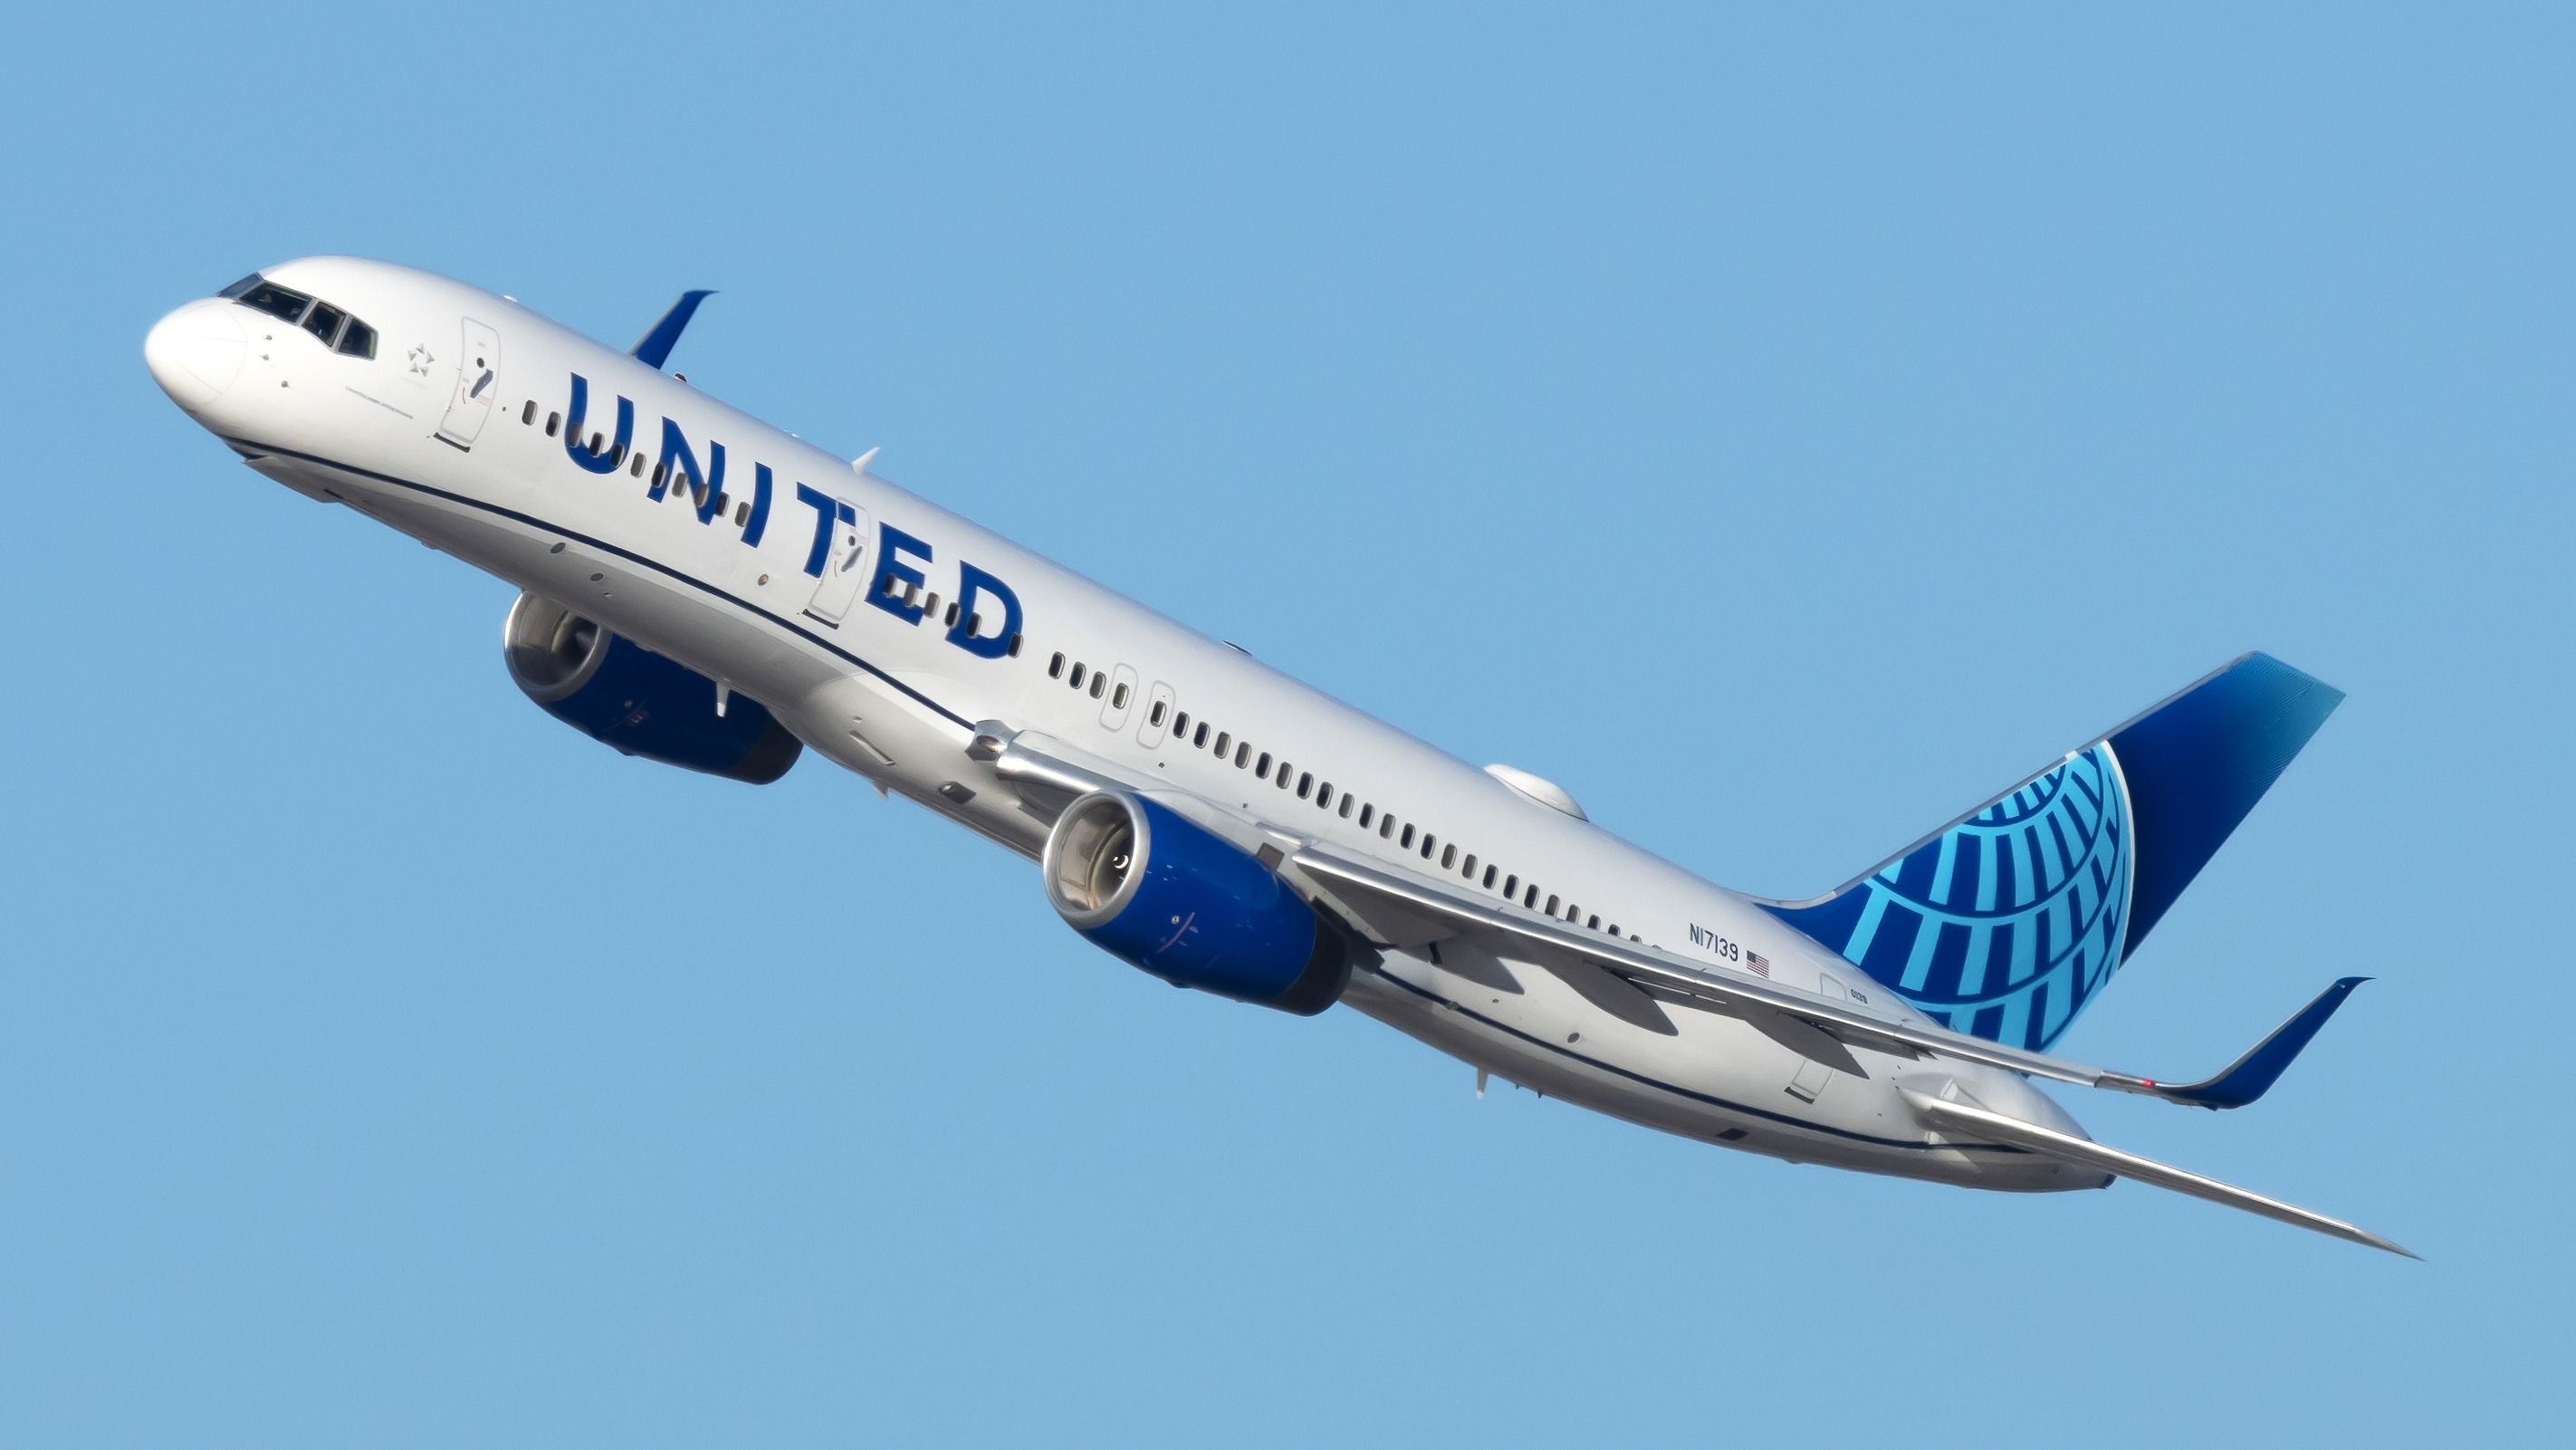 Why Doesn't United Airlines Fly To JFK Airport?